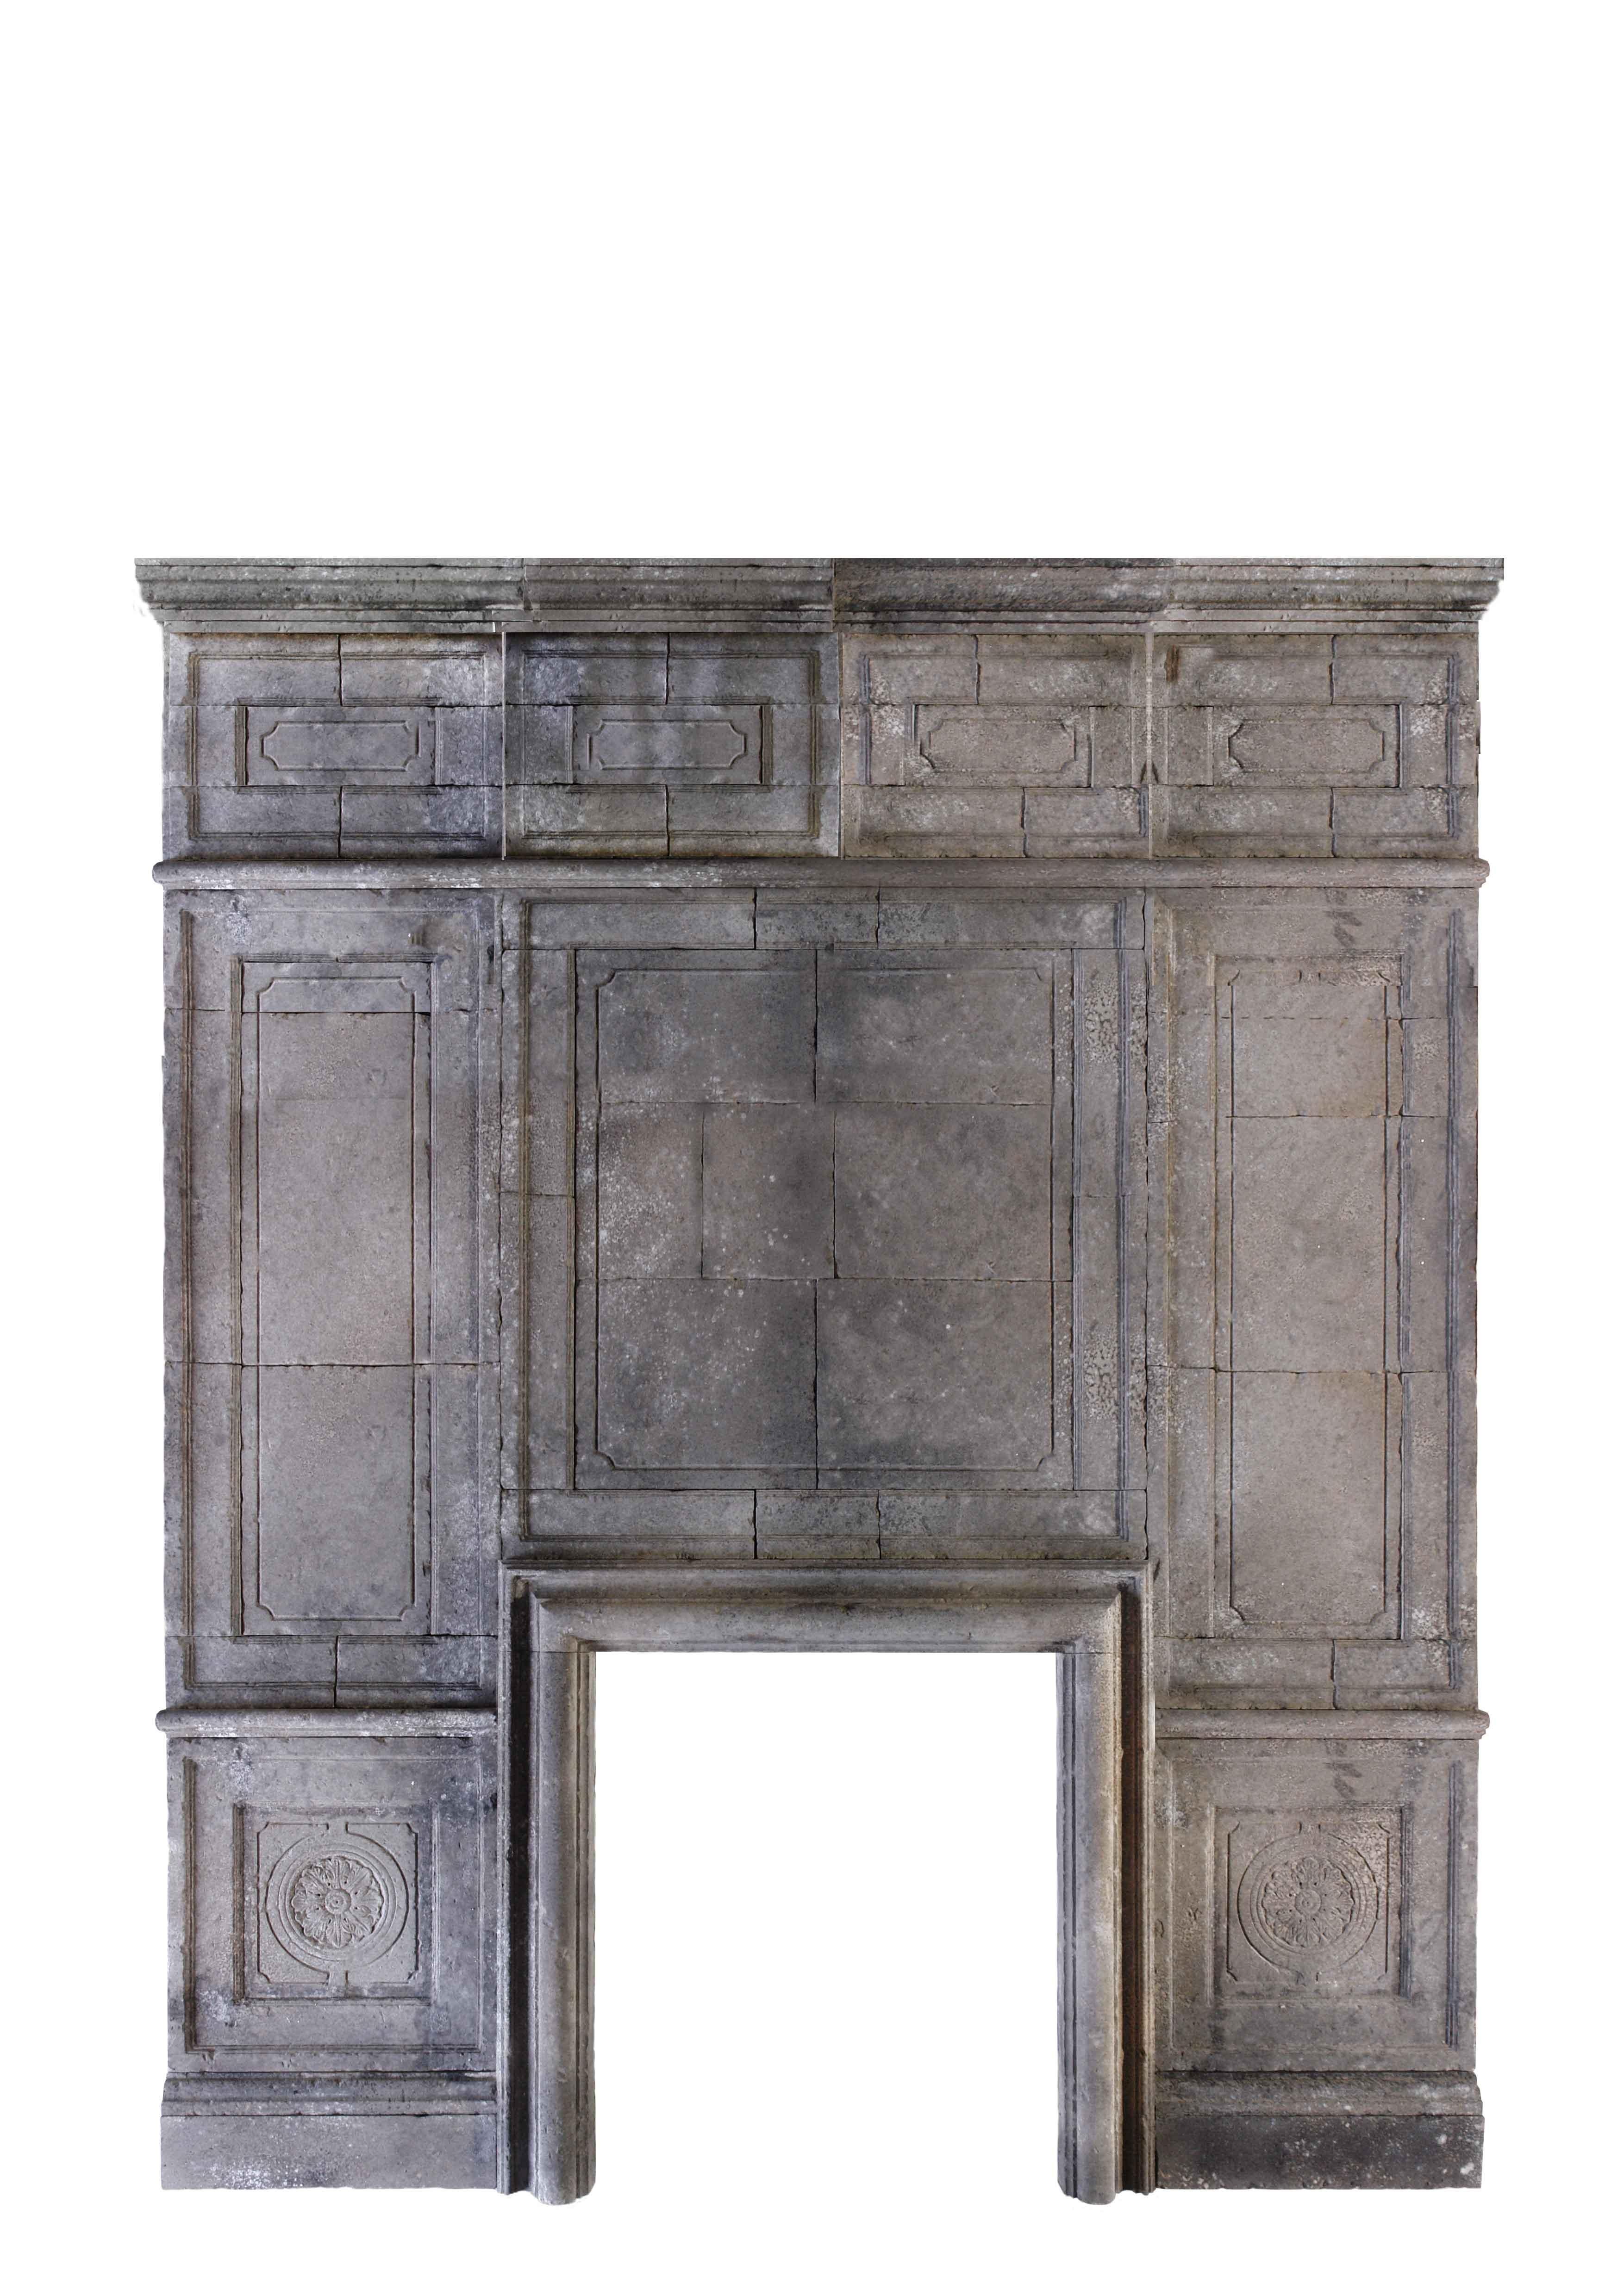 20th Century Louis XIII Style Fireplace and Wall Panels in Limestone from France For Sale